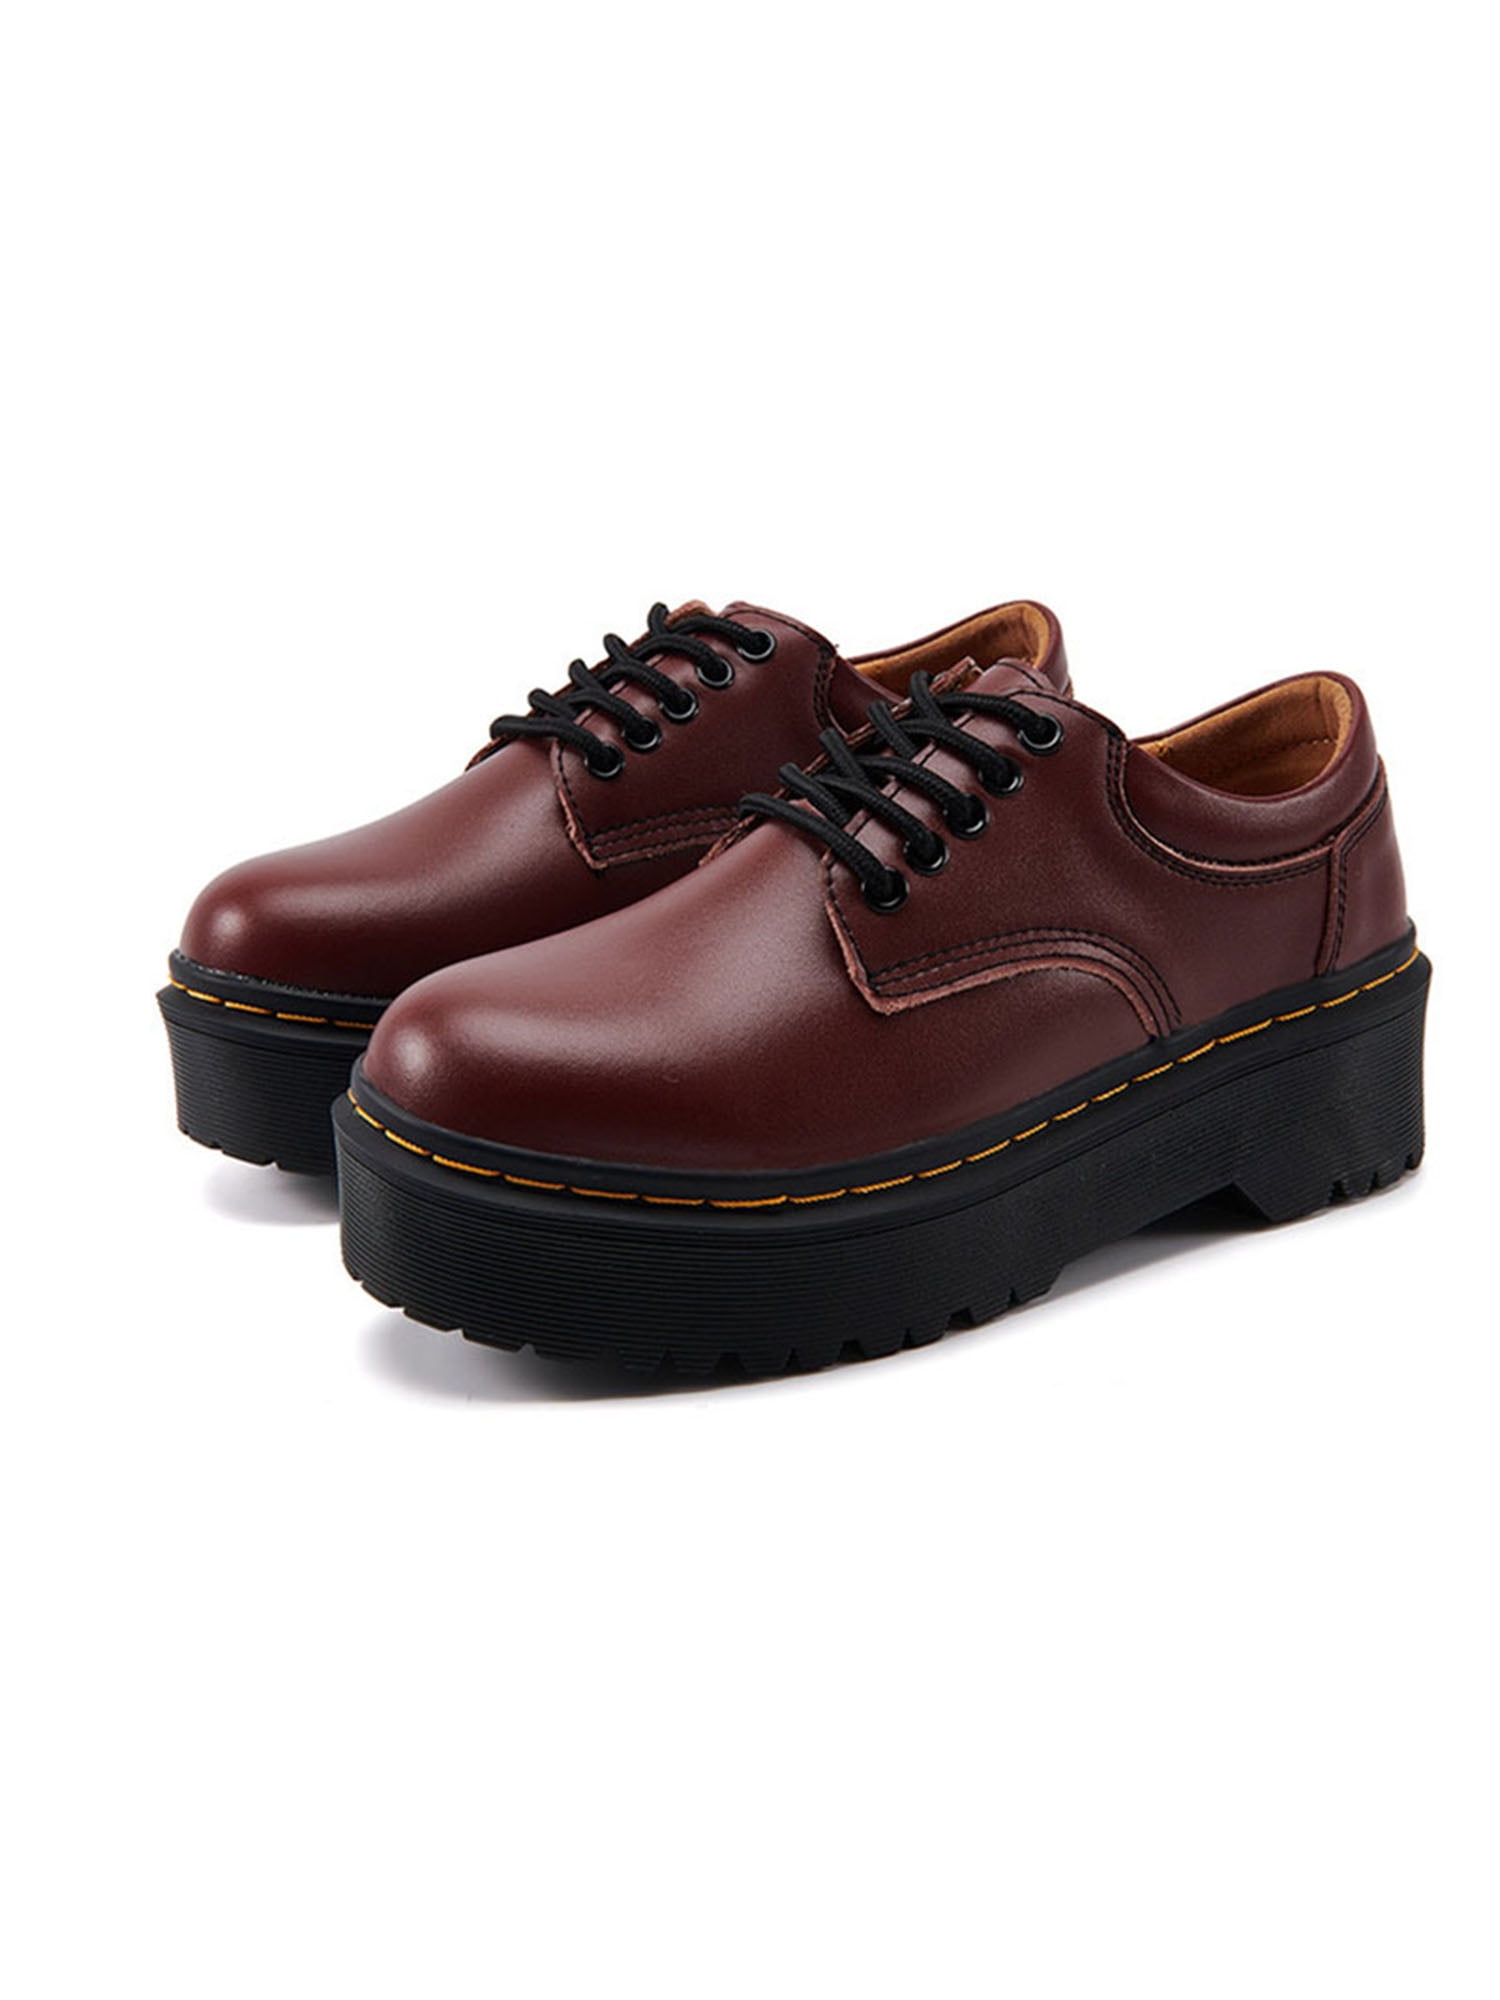 Details about   Retro Women Real Leather Round Toe Oxfords Lace Up Casual Shoes Breathable Shoes